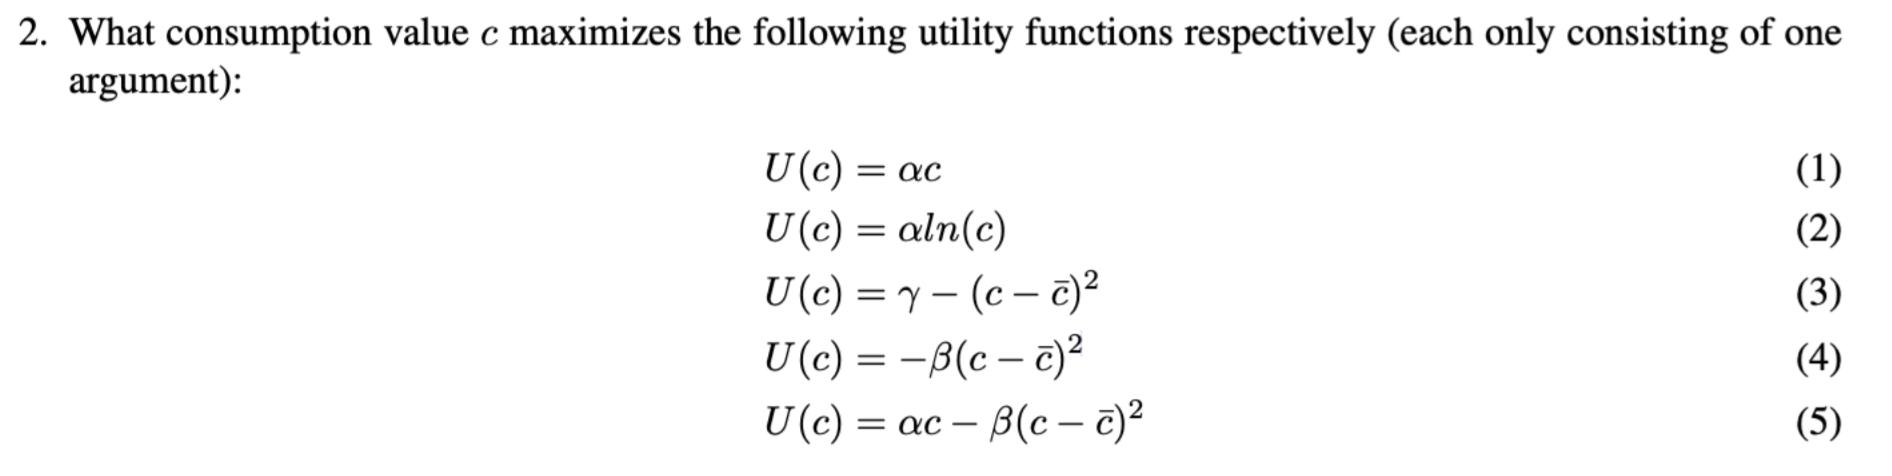 2. What consumption value c maximizes the following utility functions respectively (each only consisting of oneargument):=